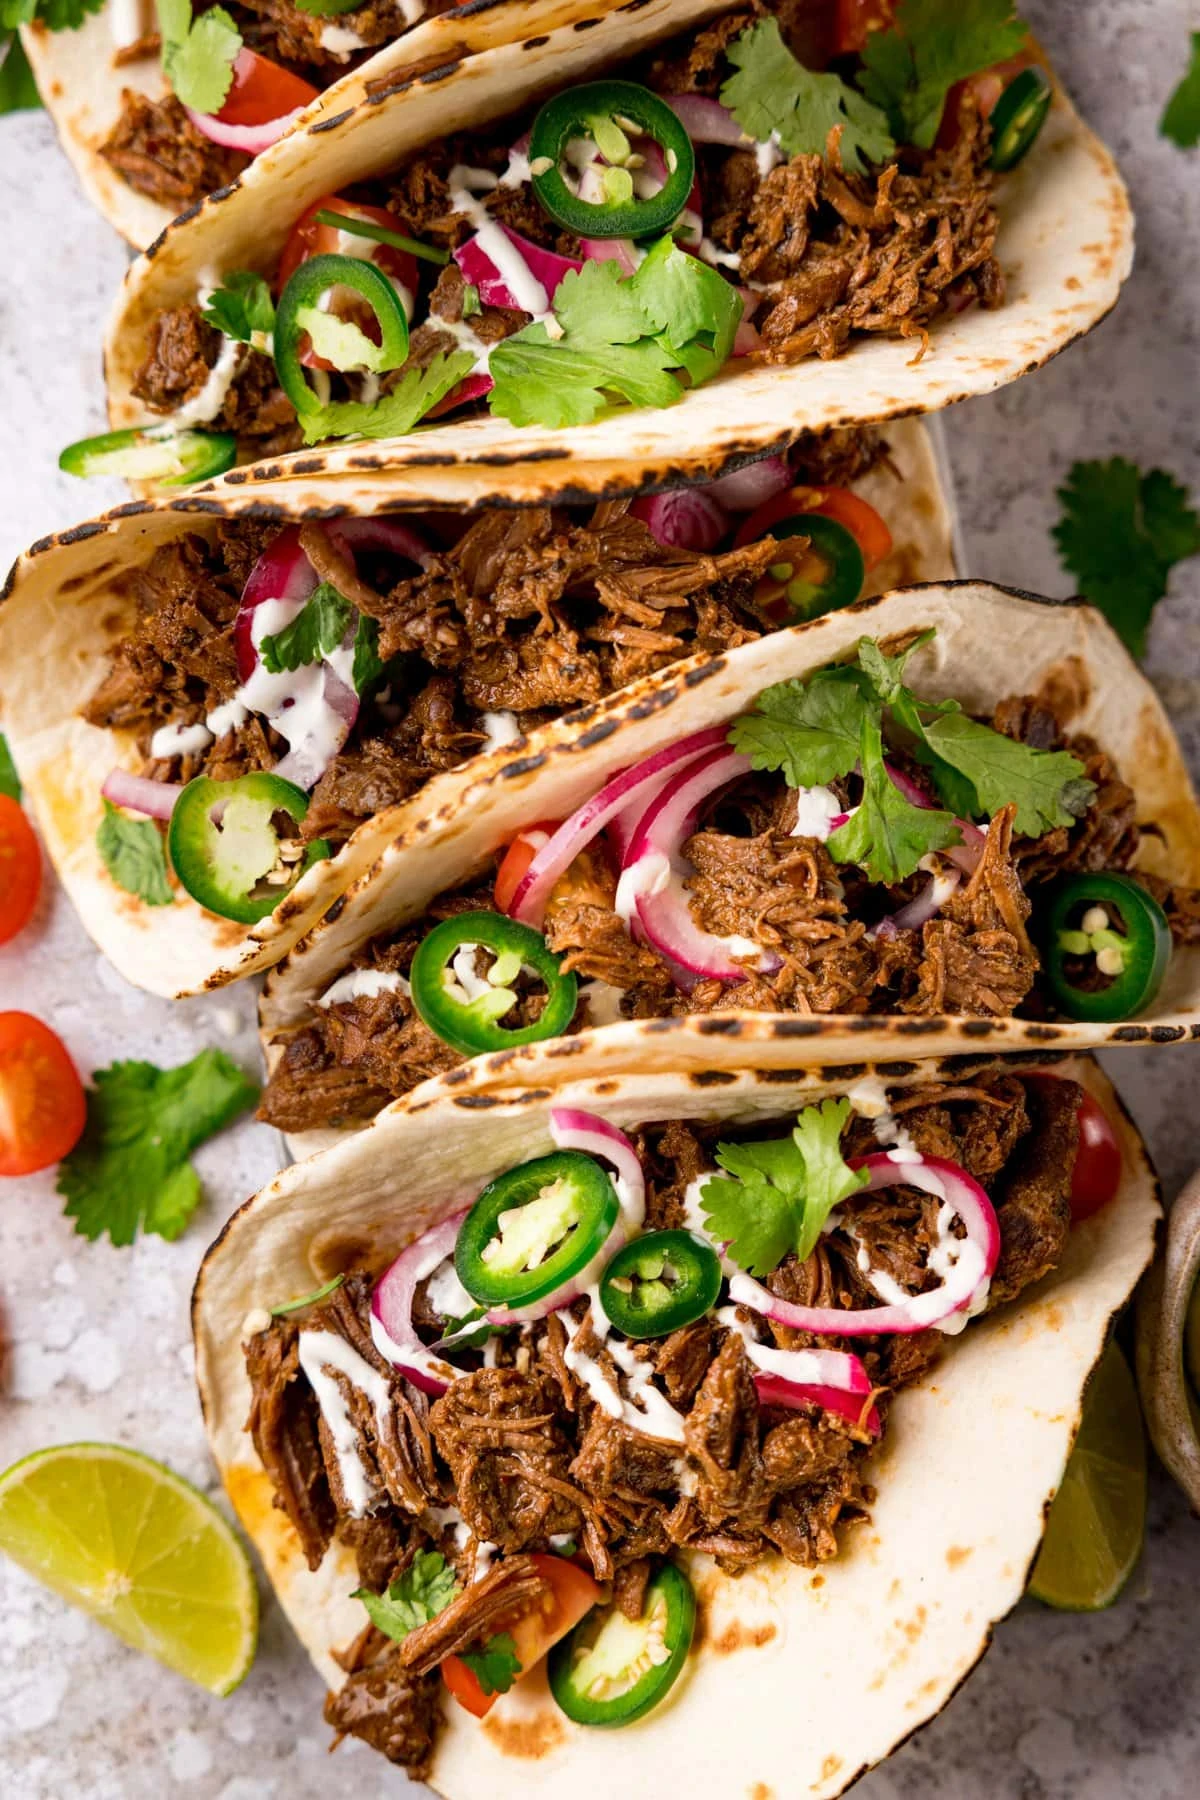 Overhead image of beef barbacoa tacos lined up on a light background